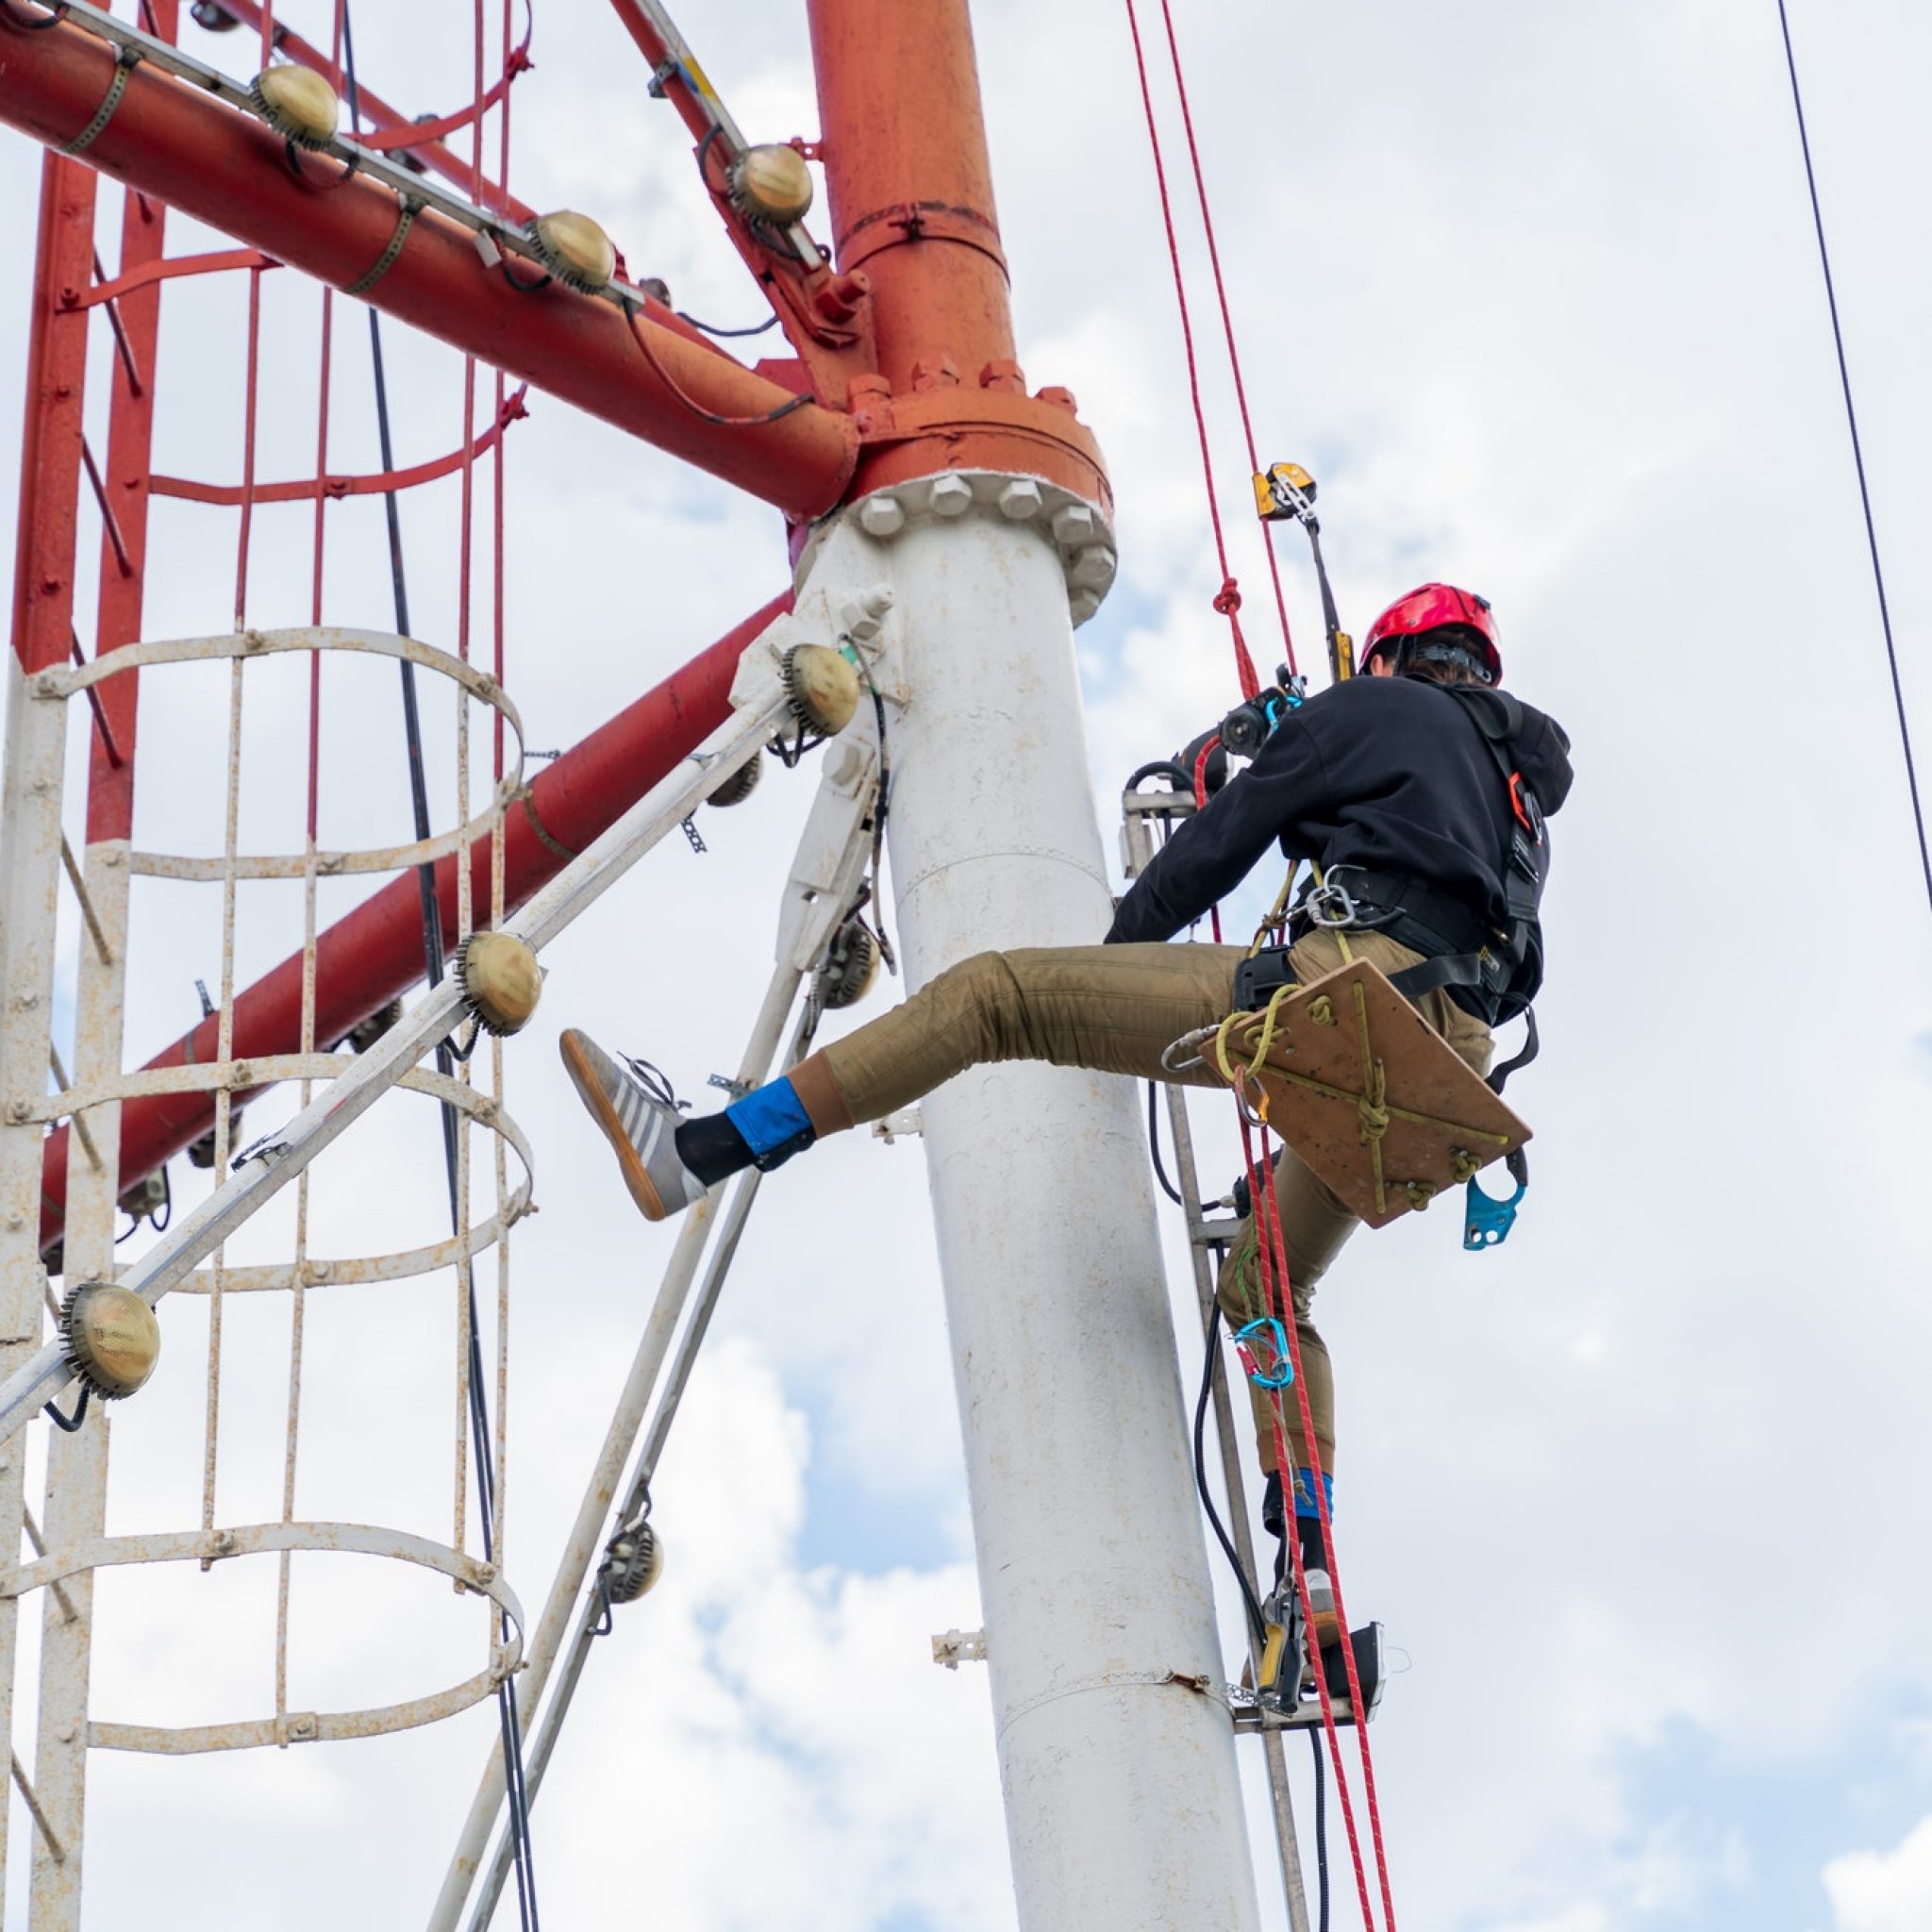 a-worker-with-climbing-equipment-serves-a-city-tv-tower-work-at-a-high-rise-facility-